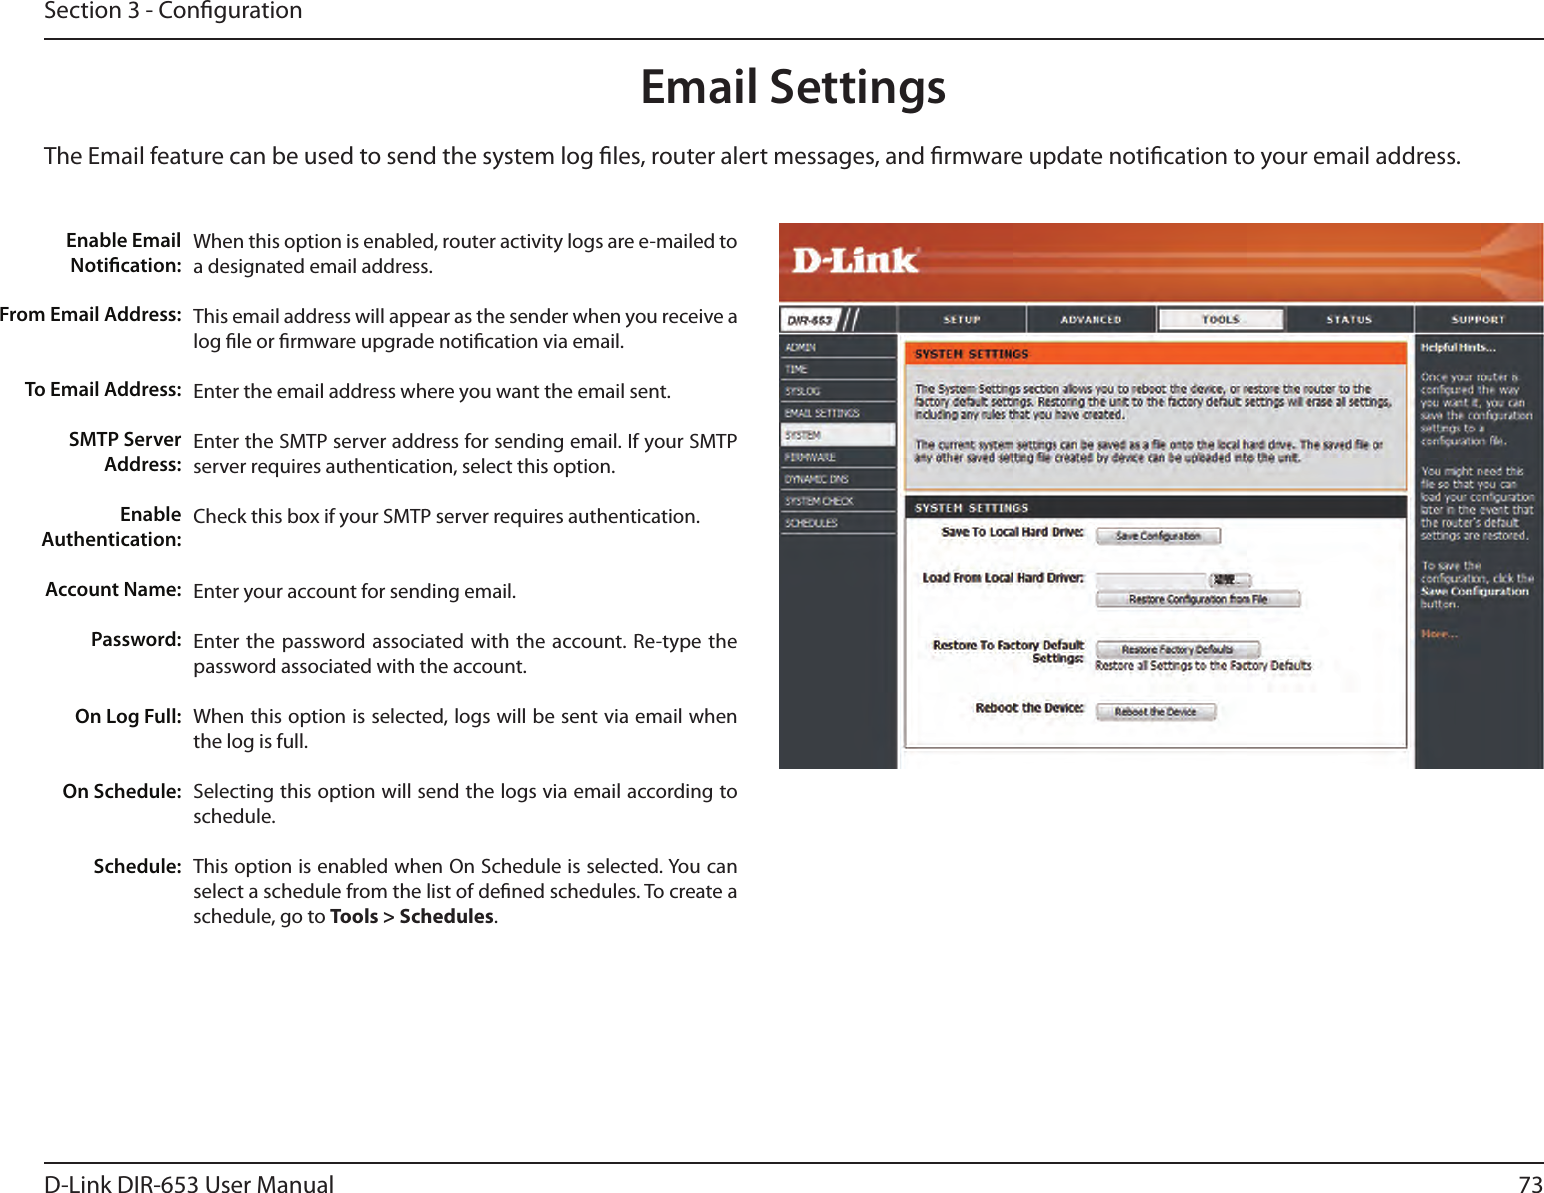 73D-Link DIR-653 User ManualSection 3 - CongurationEmail SettingsThe Email feature can be used to send the system log les, router alert messages, and rmware update notication to your email address. Enable Email Notication: From Email Address:To Email Address:SMTP Server Address:Enable Authentication:Account Name:Password:On Log Full:On Schedule:Schedule:When this option is enabled, router activity logs are e-mailed to a designated email address.This email address will appear as the sender when you receive a log le or rmware upgrade notication via email.Enter the email address where you want the email sent. Enter the SMTP server address for sending email. If your SMTP server requires authentication, select this option.Check this box if your SMTP server requires authentication. Enter your account for sending email.Enter the password associated with the account. Re-type the password associated with the account.When this option is selected, logs will be sent via email when the log is full.Selecting this option will send the logs via email according to schedule.This option is enabled when On Schedule is selected. You can select a schedule from the list of dened schedules. To create a schedule, go to Tools &gt; Schedules.